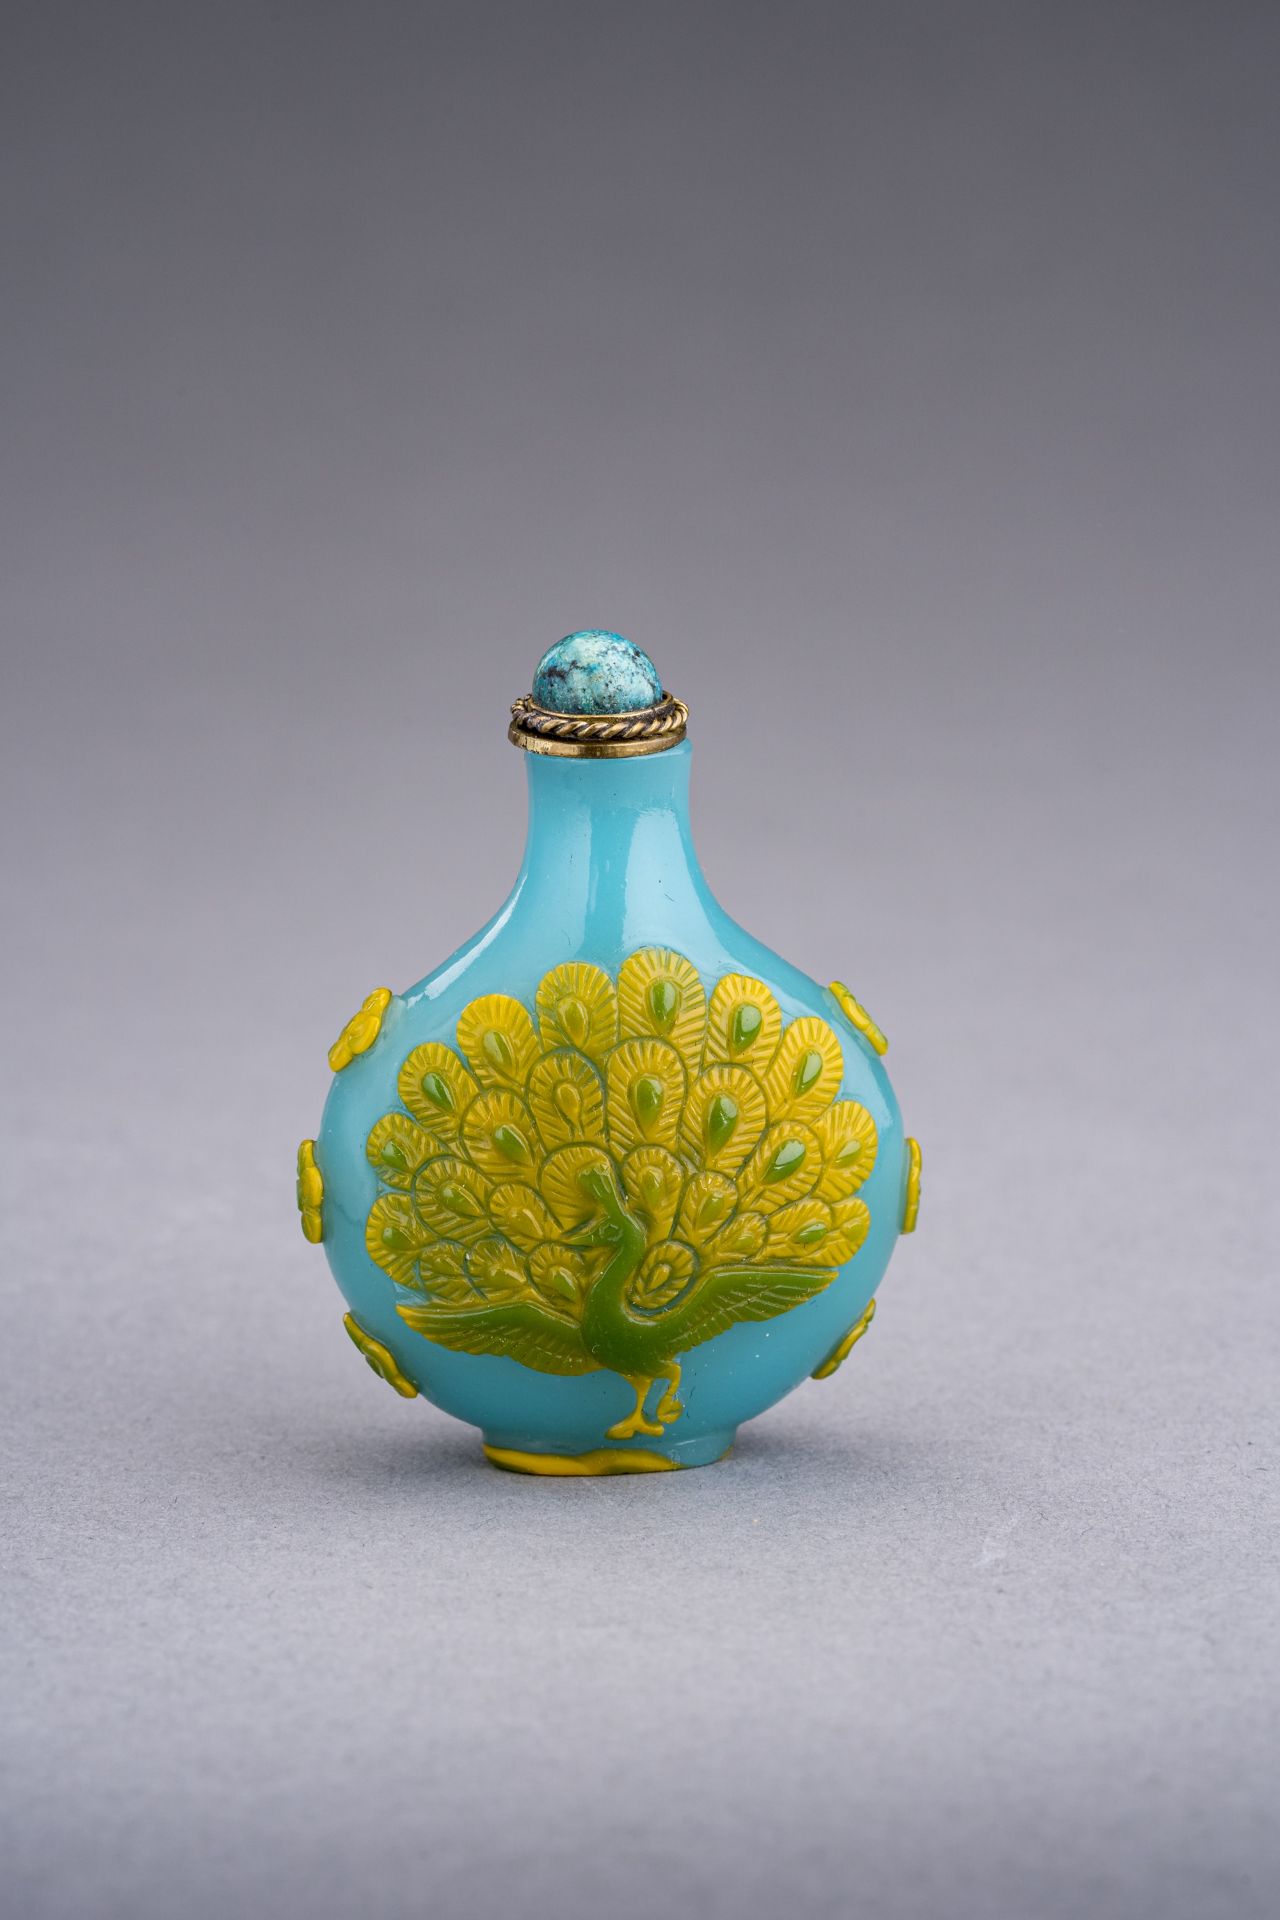 A YELLOW OVERLAY TURQUOISE GLASS 'PEACOCK' SNUFF BOTTLE - Image 3 of 6